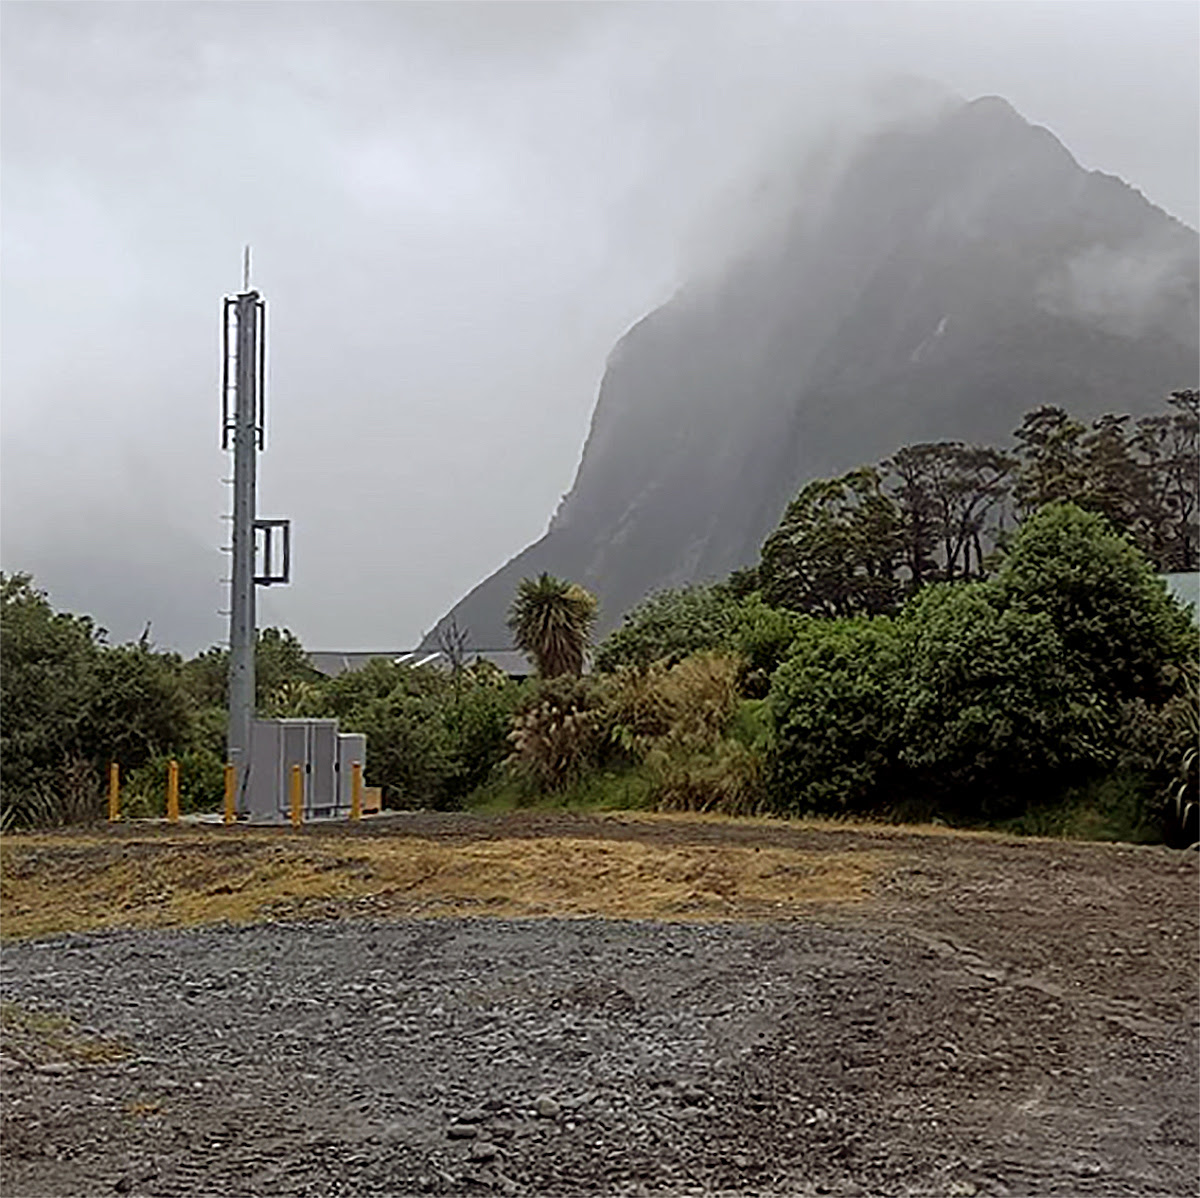 RCG - The Milford Sound site